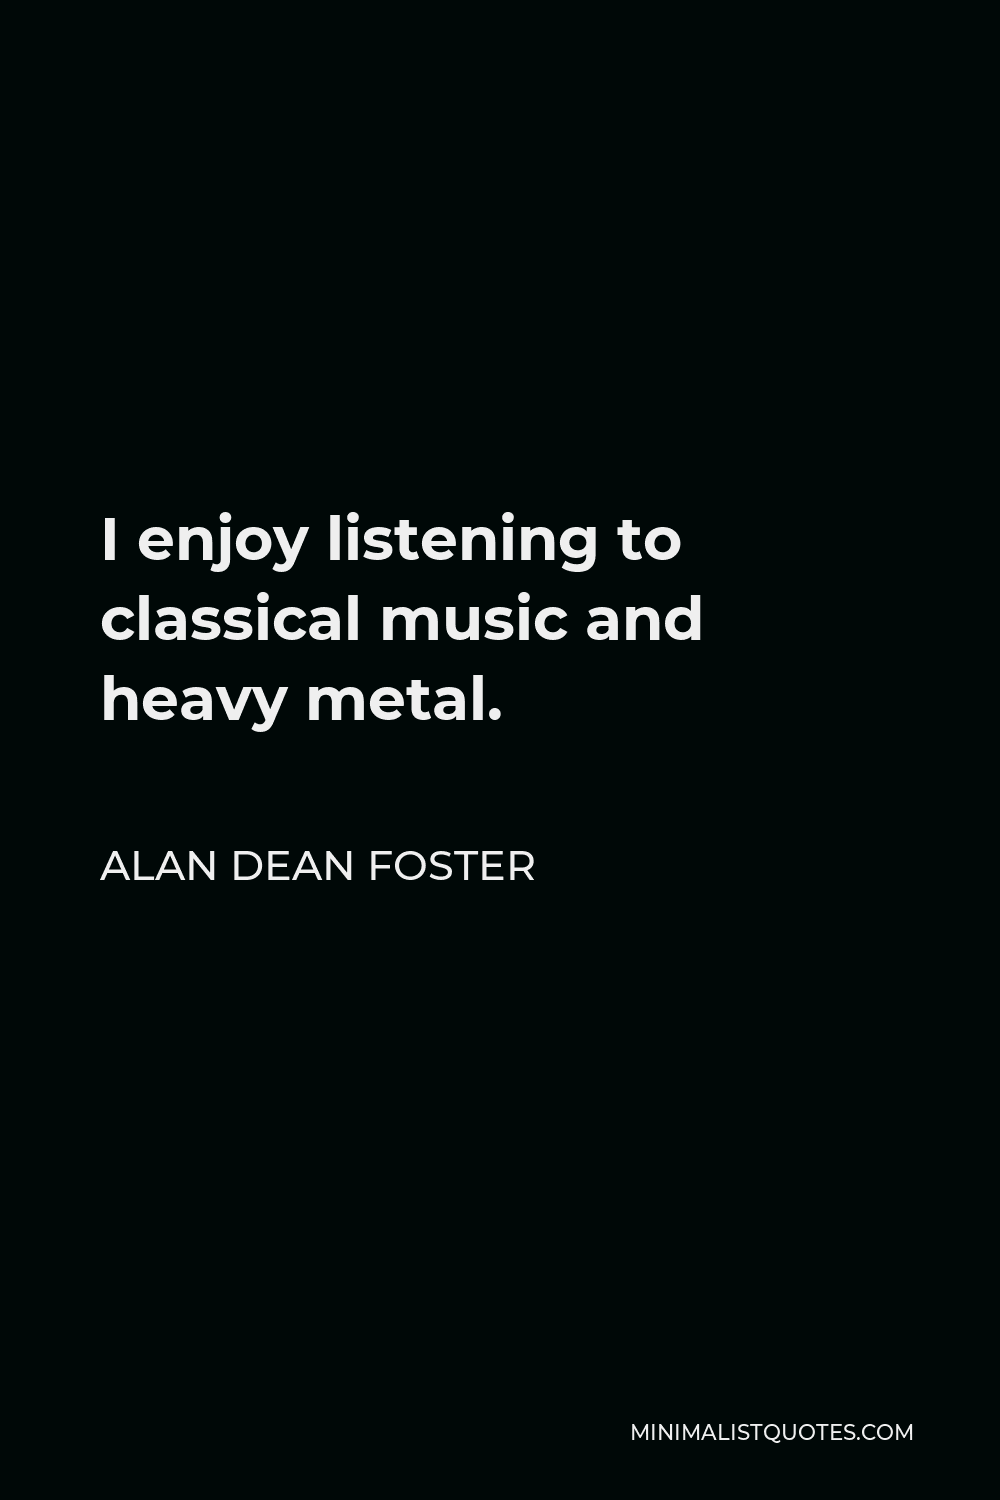 Alan Dean Foster Quote - I enjoy listening to classical music and heavy metal.